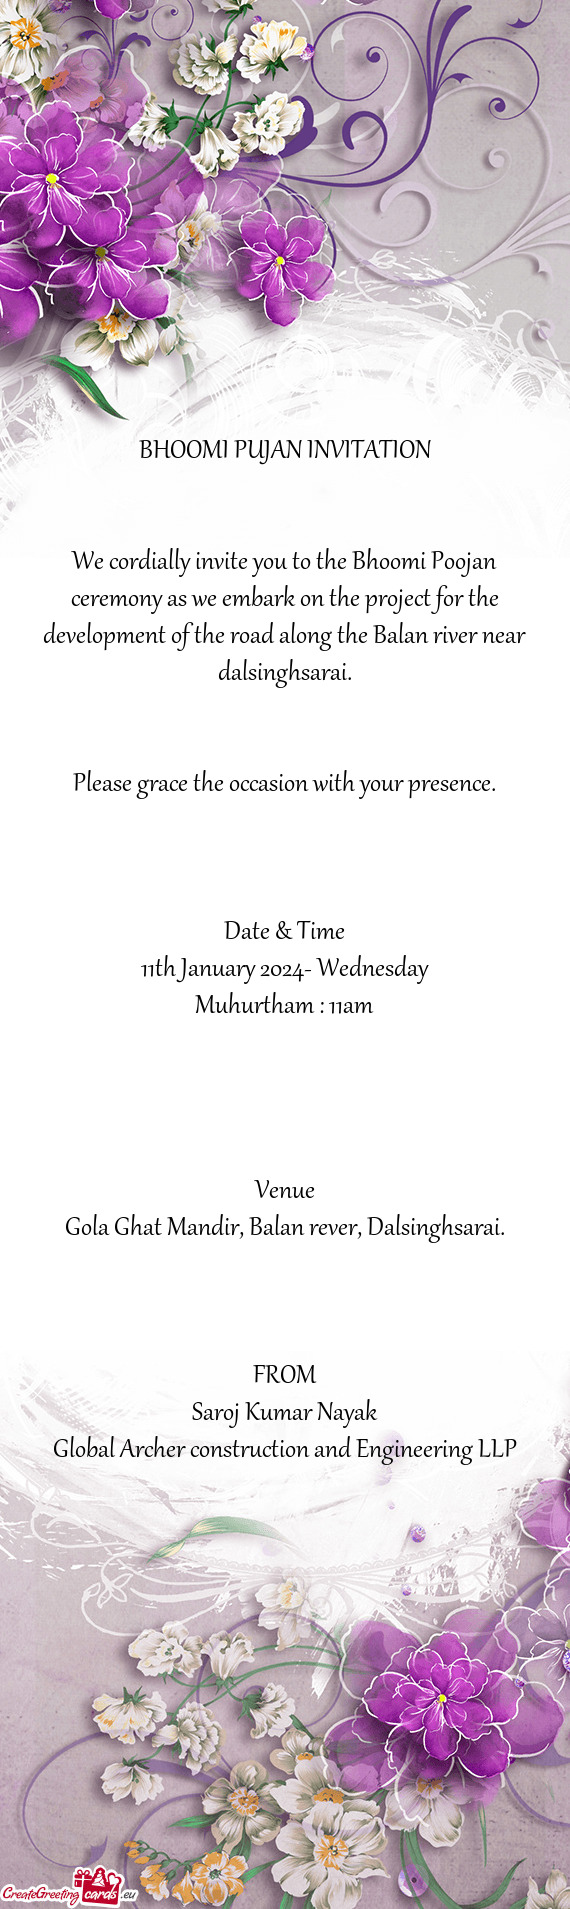 We cordially invite you to the Bhoomi Poojan ceremony as we embark on the project for the developmen